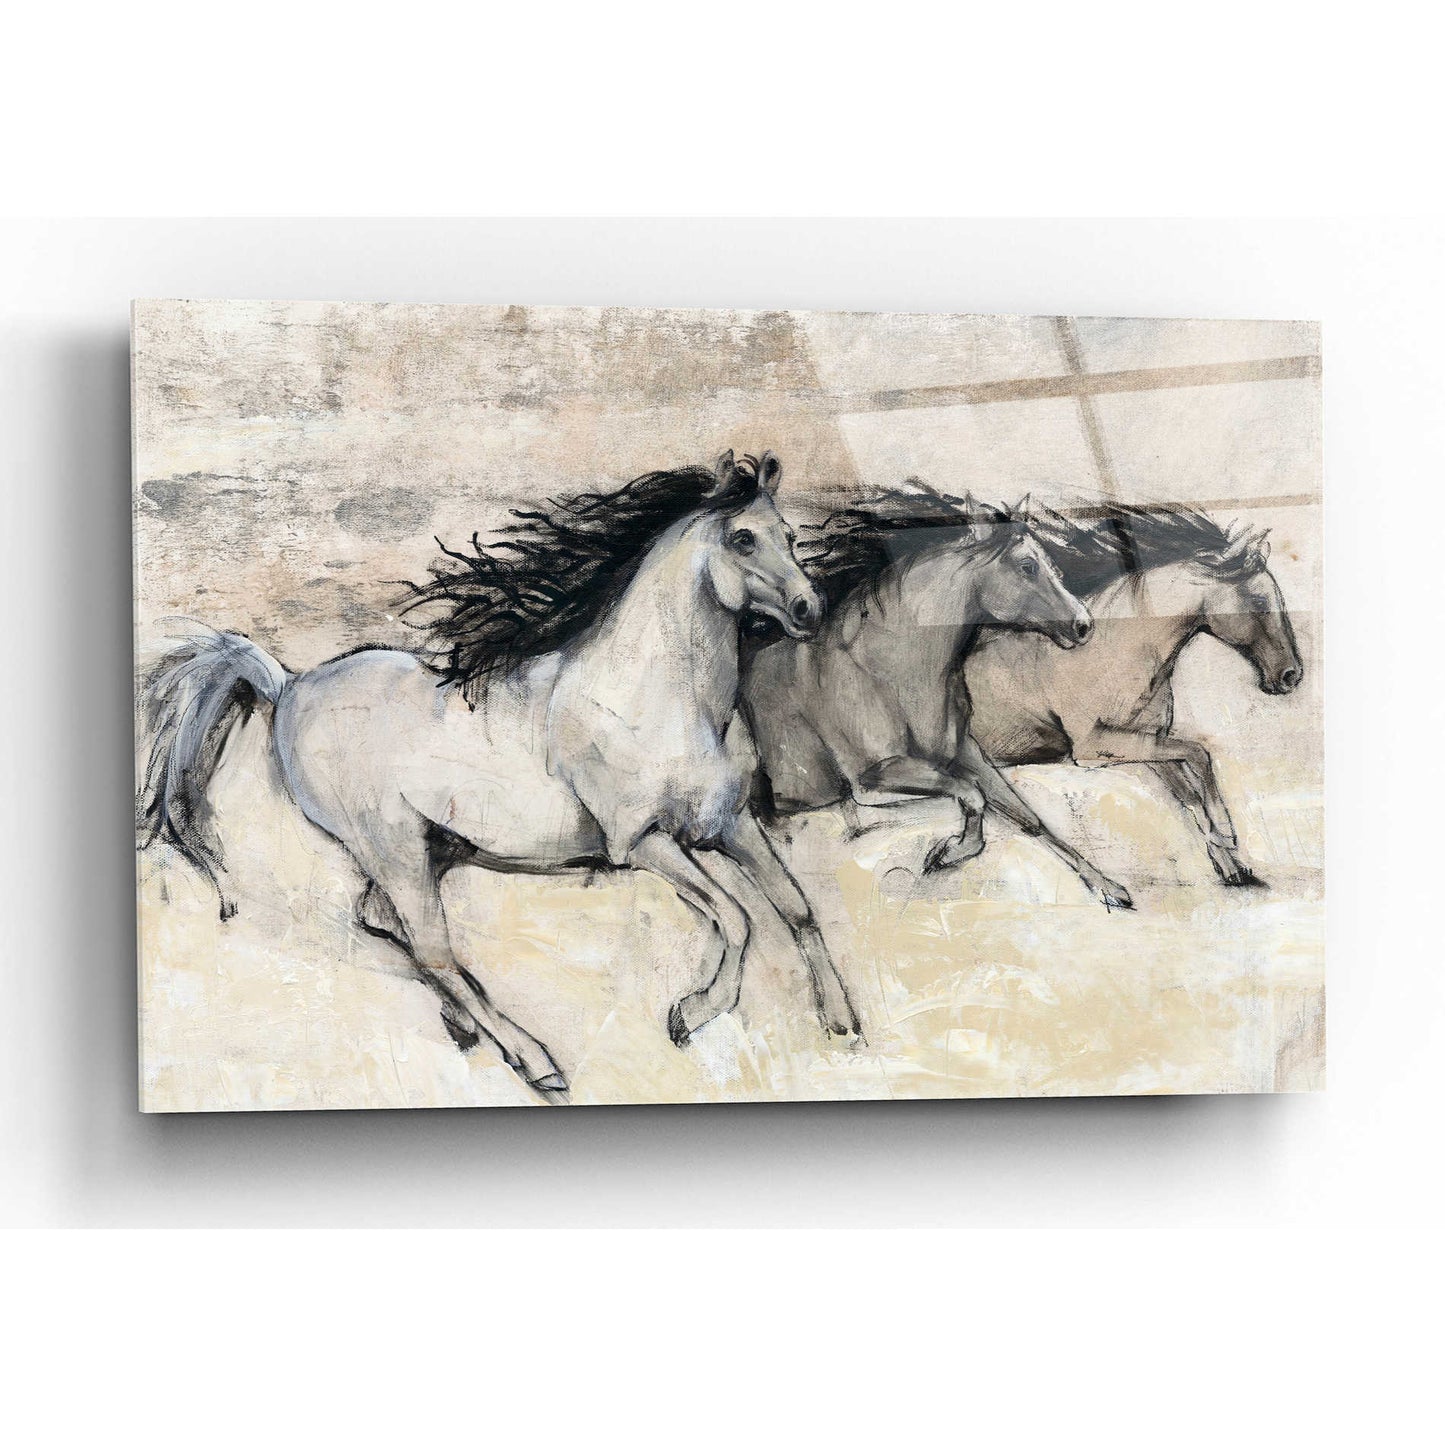 Epic Art 'Horses in Motion II' by Tim O'Toole, Acrylic Glass Wall Art,16x12